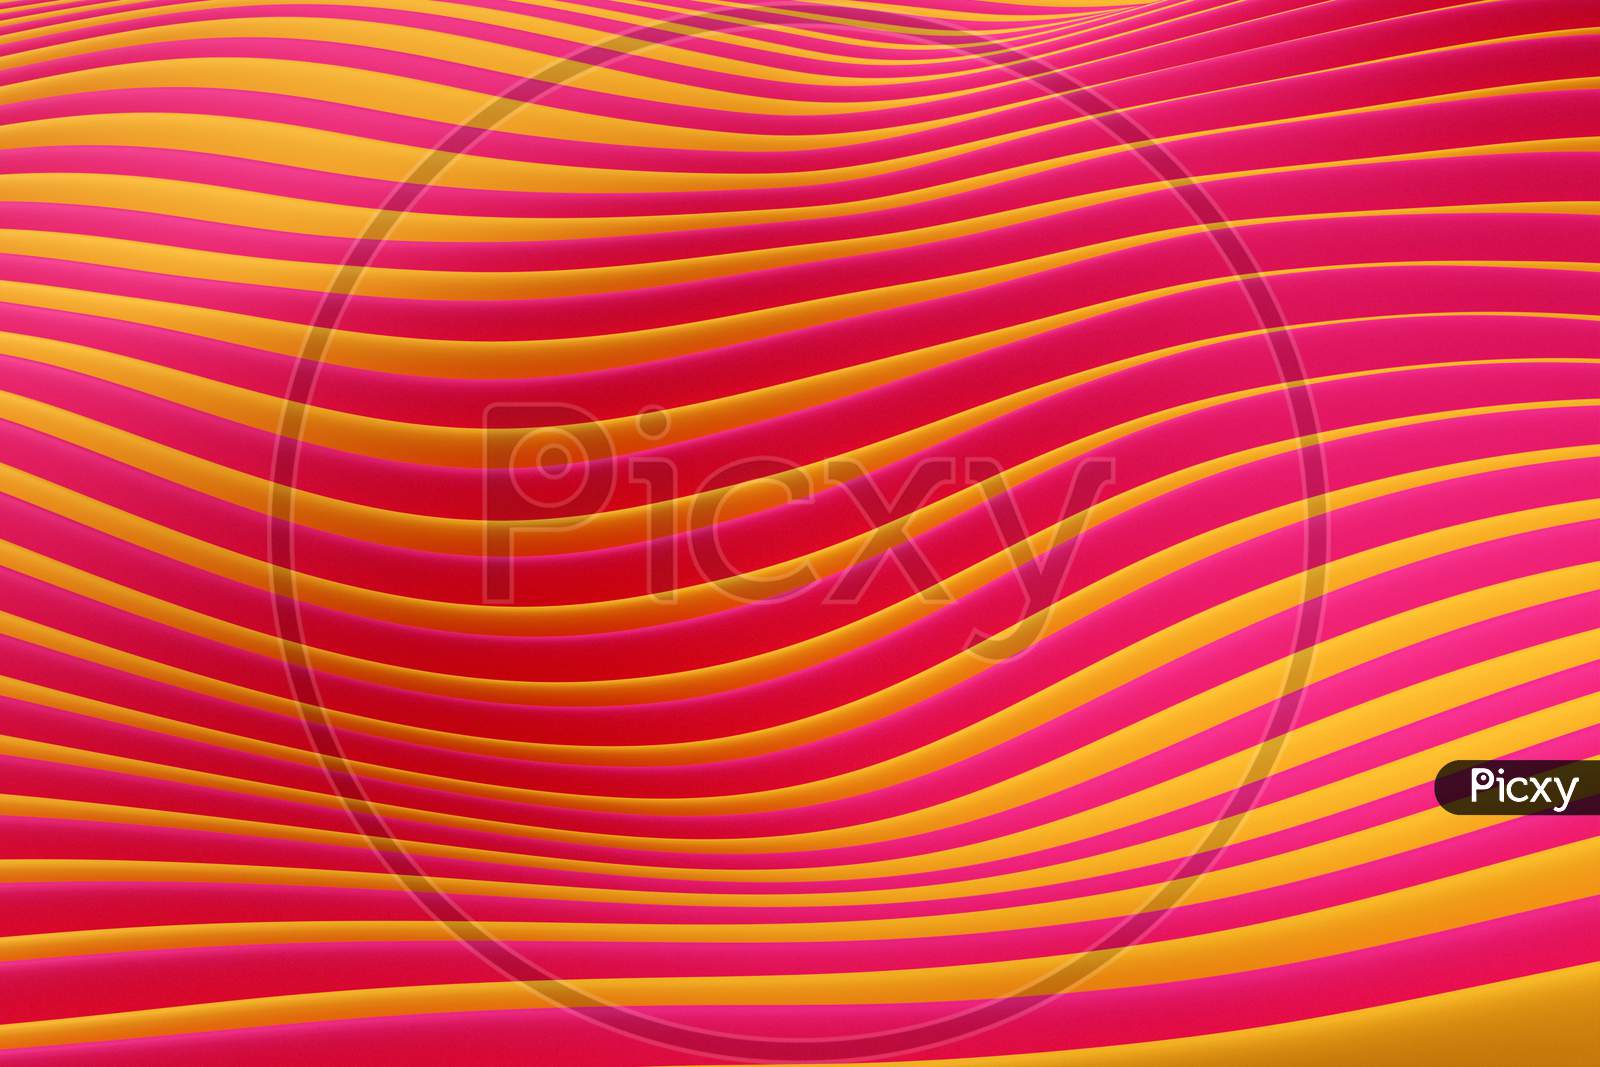 3D Illustration  Rows Of Orange, Red Line  .Geometric Background, Weave Pattern.